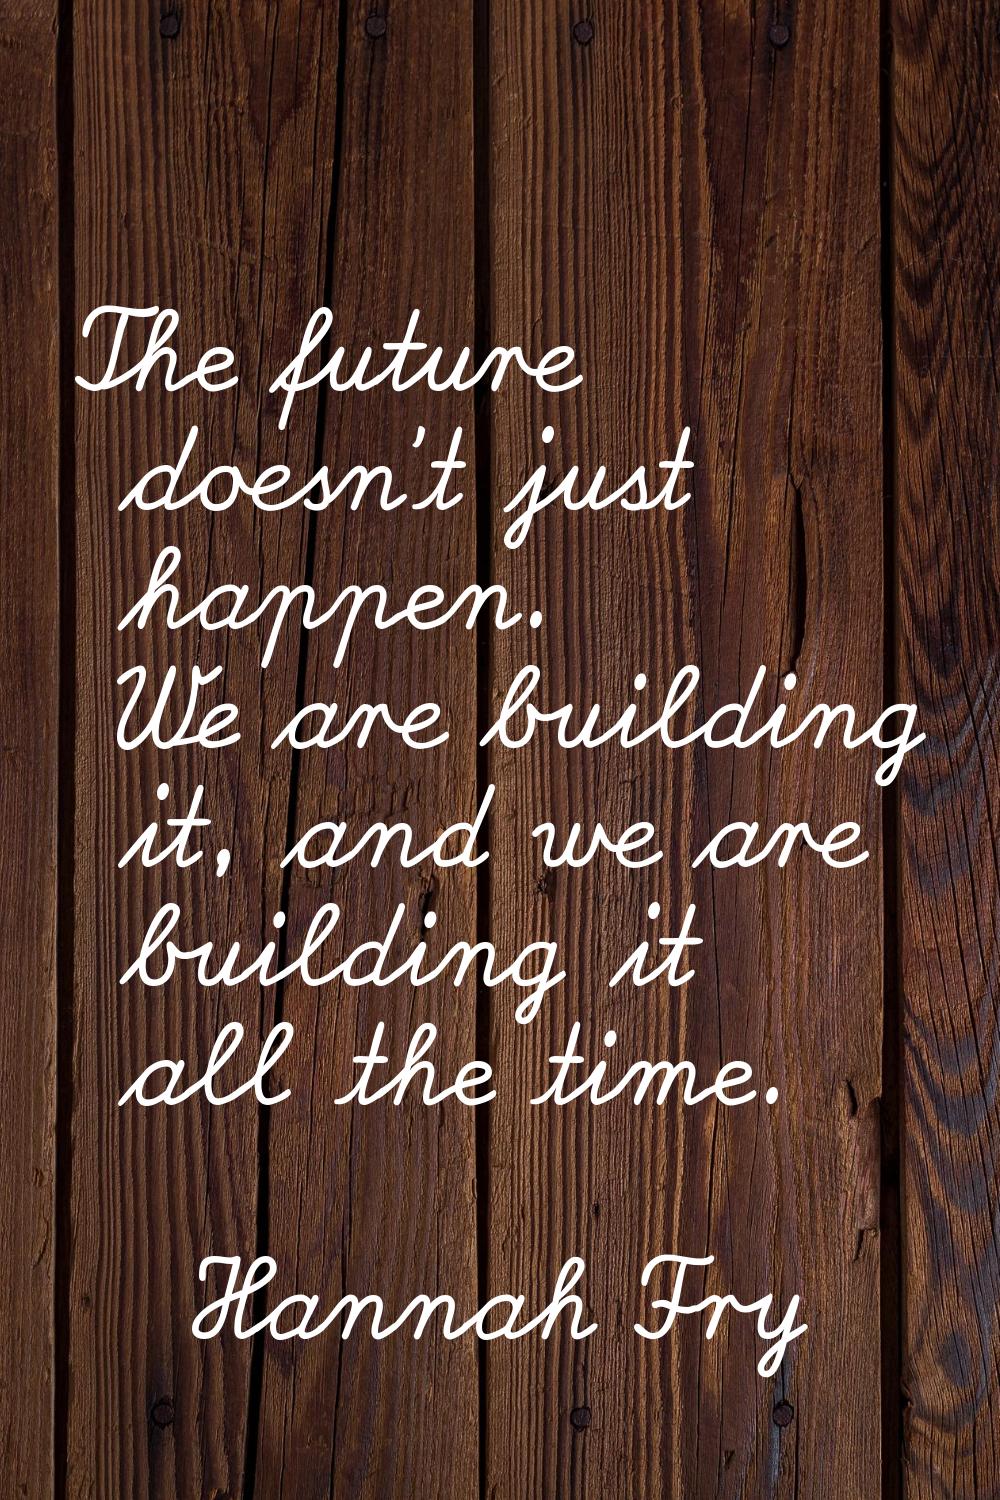 The future doesn't just happen. We are building it, and we are building it all the time.